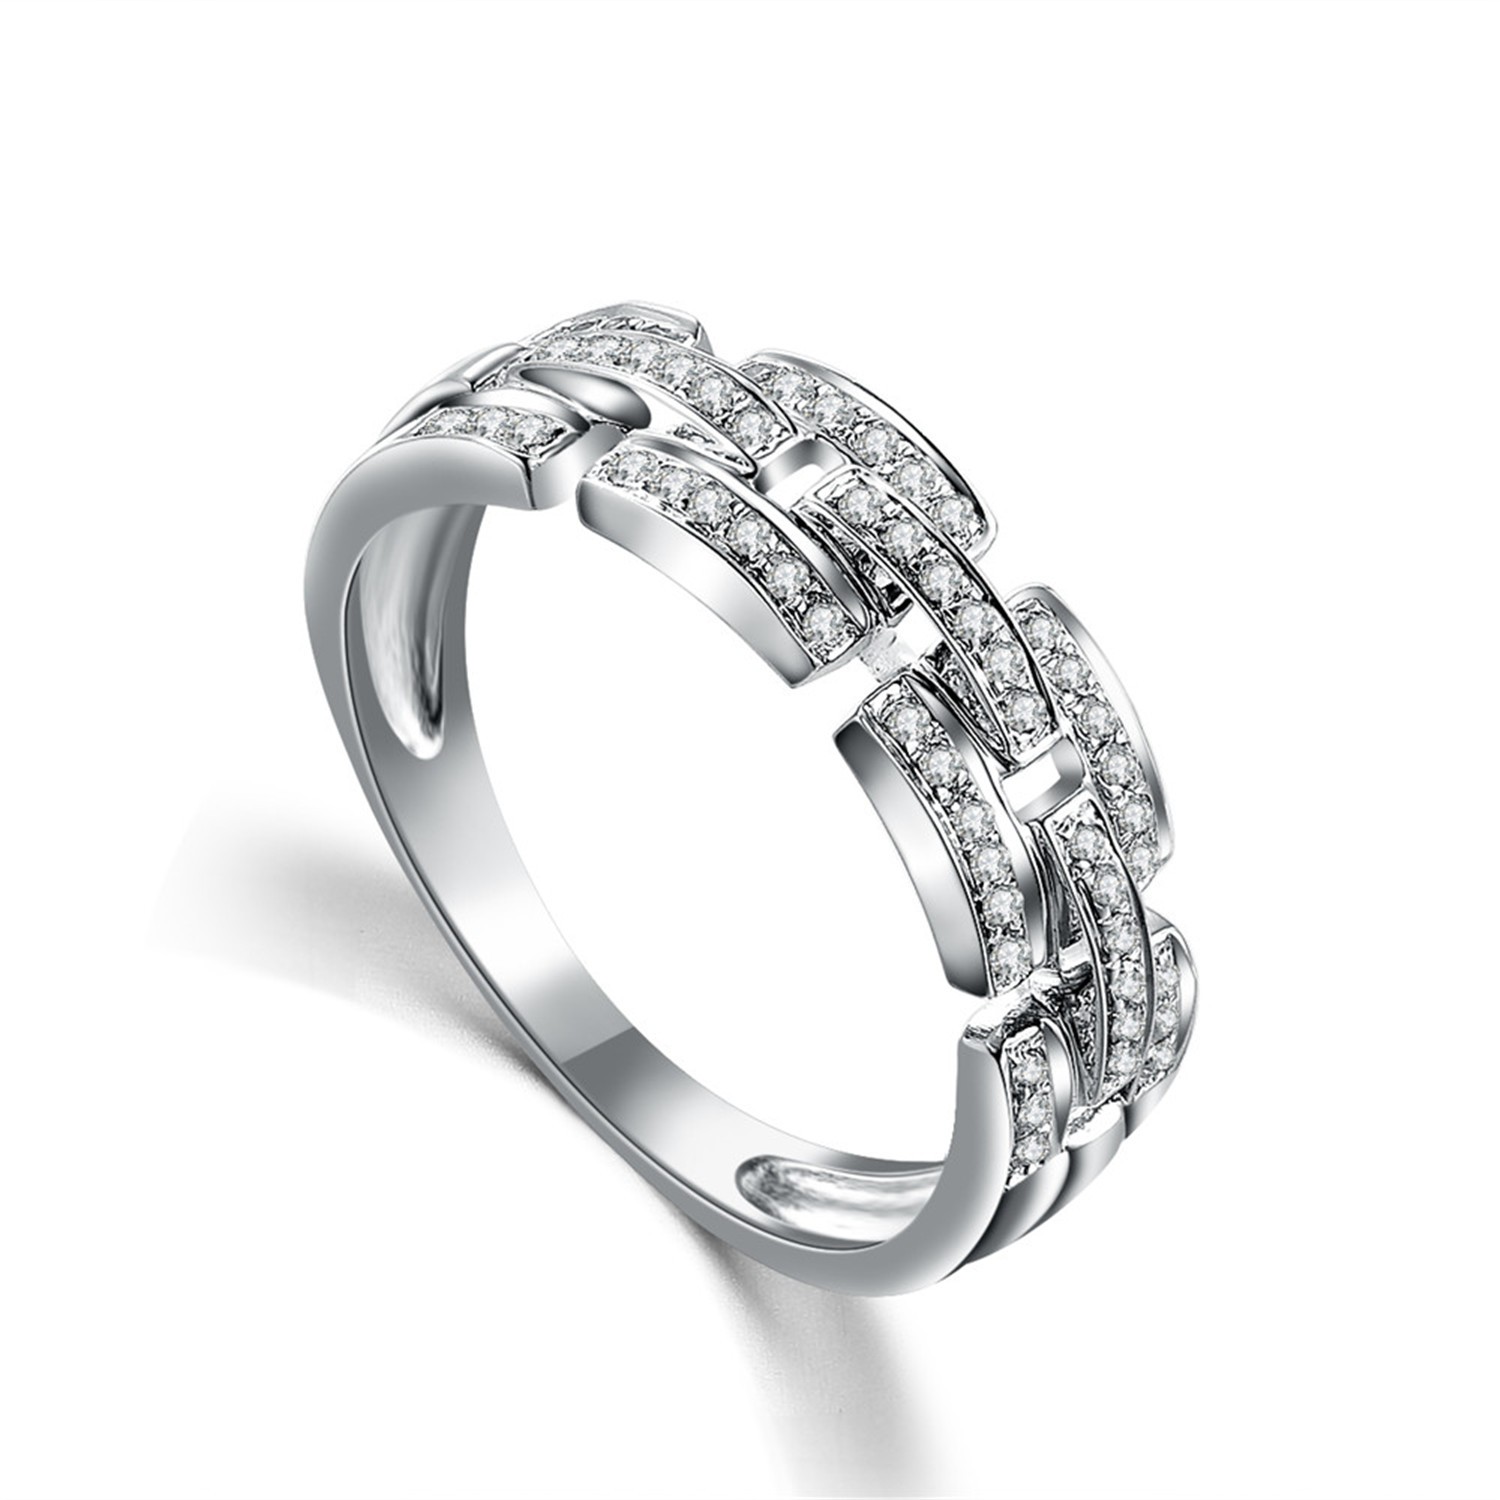 "Unlimited movement: silver rotatable ring, bring a different feeling, experience the perfect c